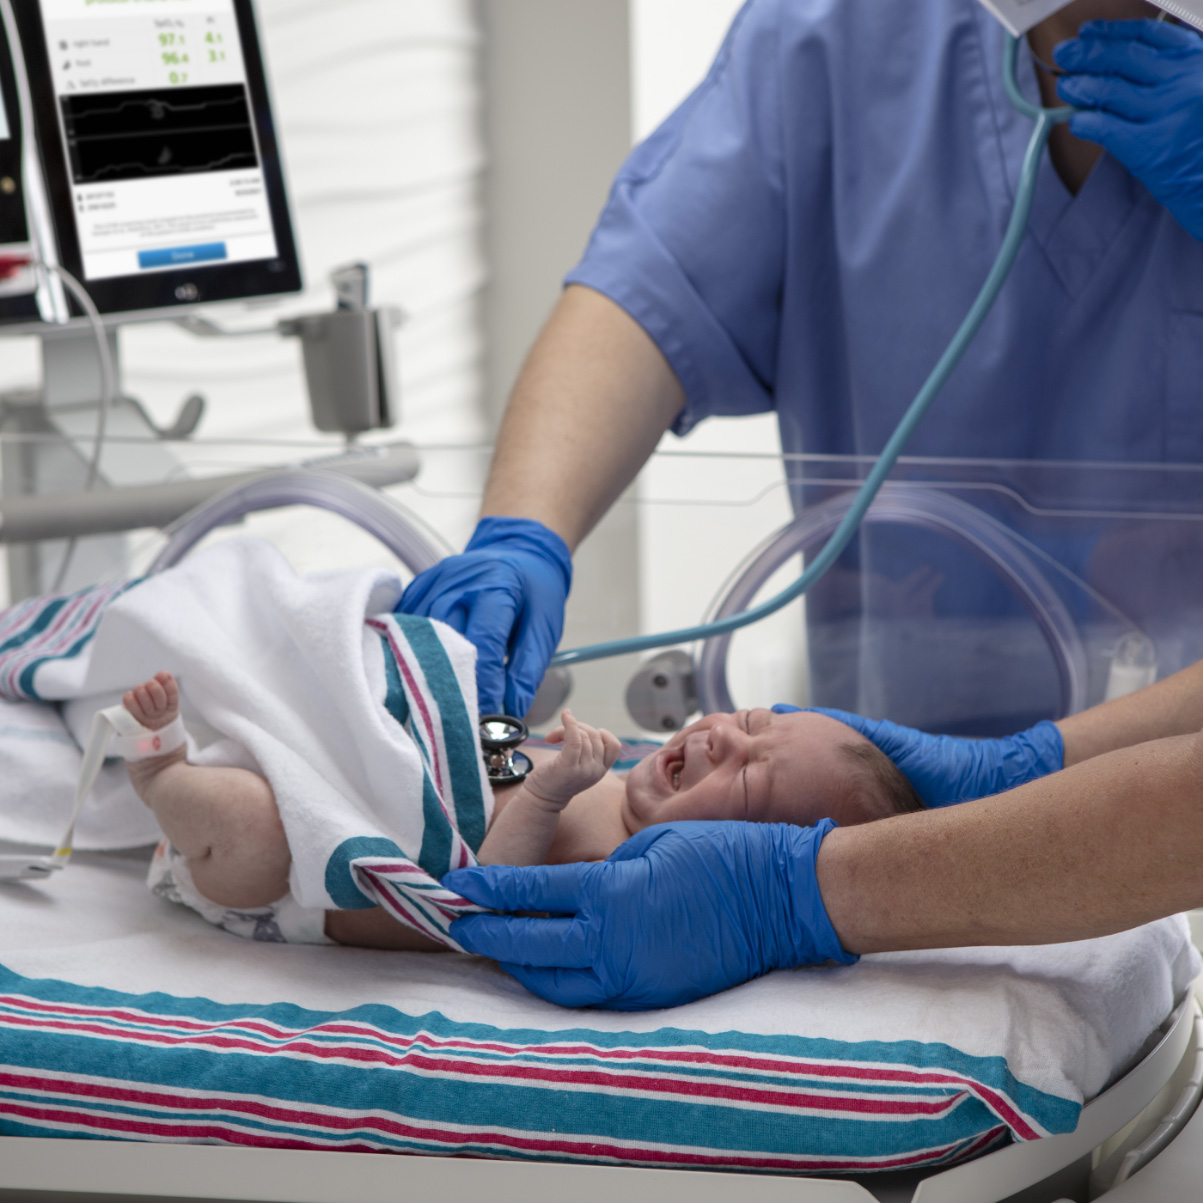 A newborn infant being screened by clinicians using a stethoscope and monitored with a Masimo Newborn pulse oximetry sensor.